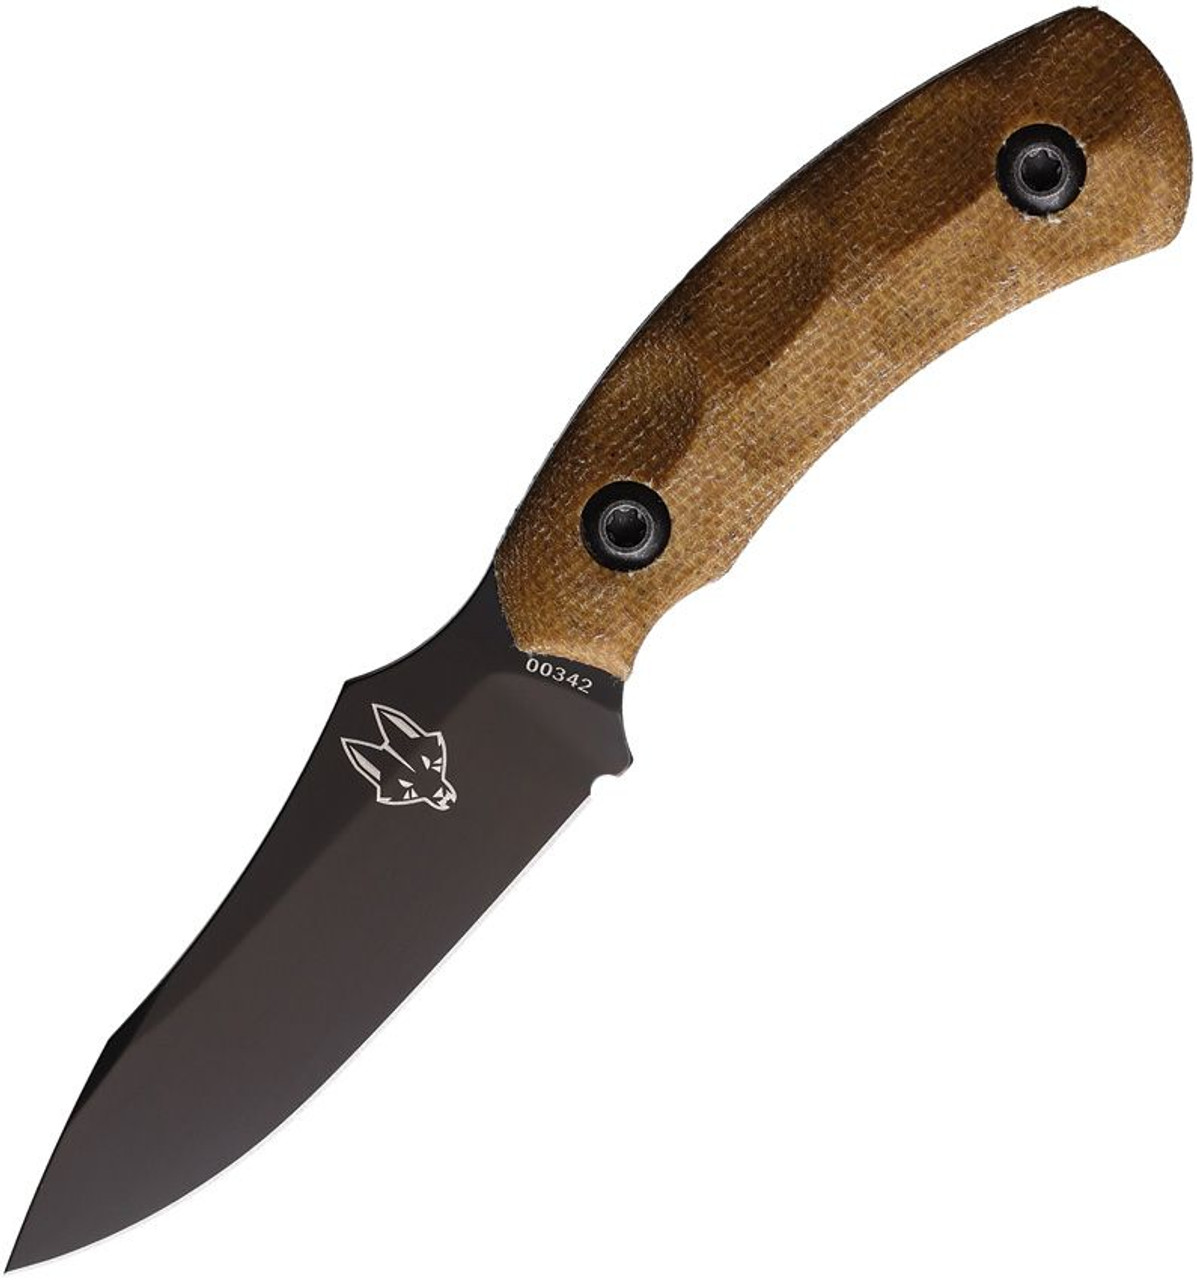 Southern Grind Jackal Pup Fixed Blade (SG22297) 4.75" 8670M Black PVD Coated Drop Point Plain Blade, Brown Sculpted Micarta Handle, Black Kydex Sheath